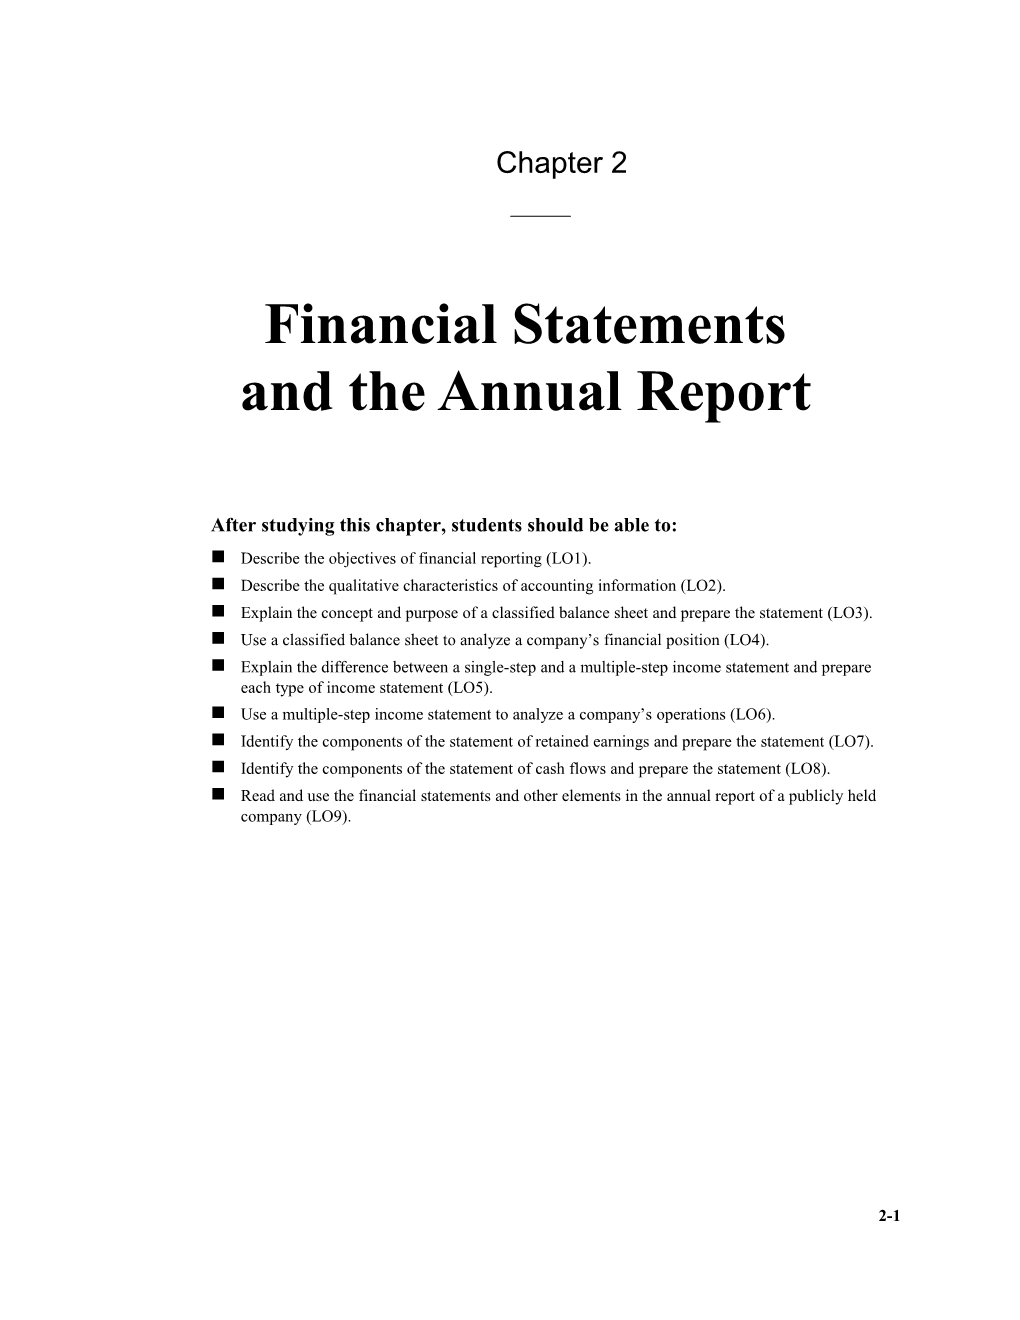 From CHAPTER 2 FINANCIAL STATEMENTS and the ANNUAL REPORT